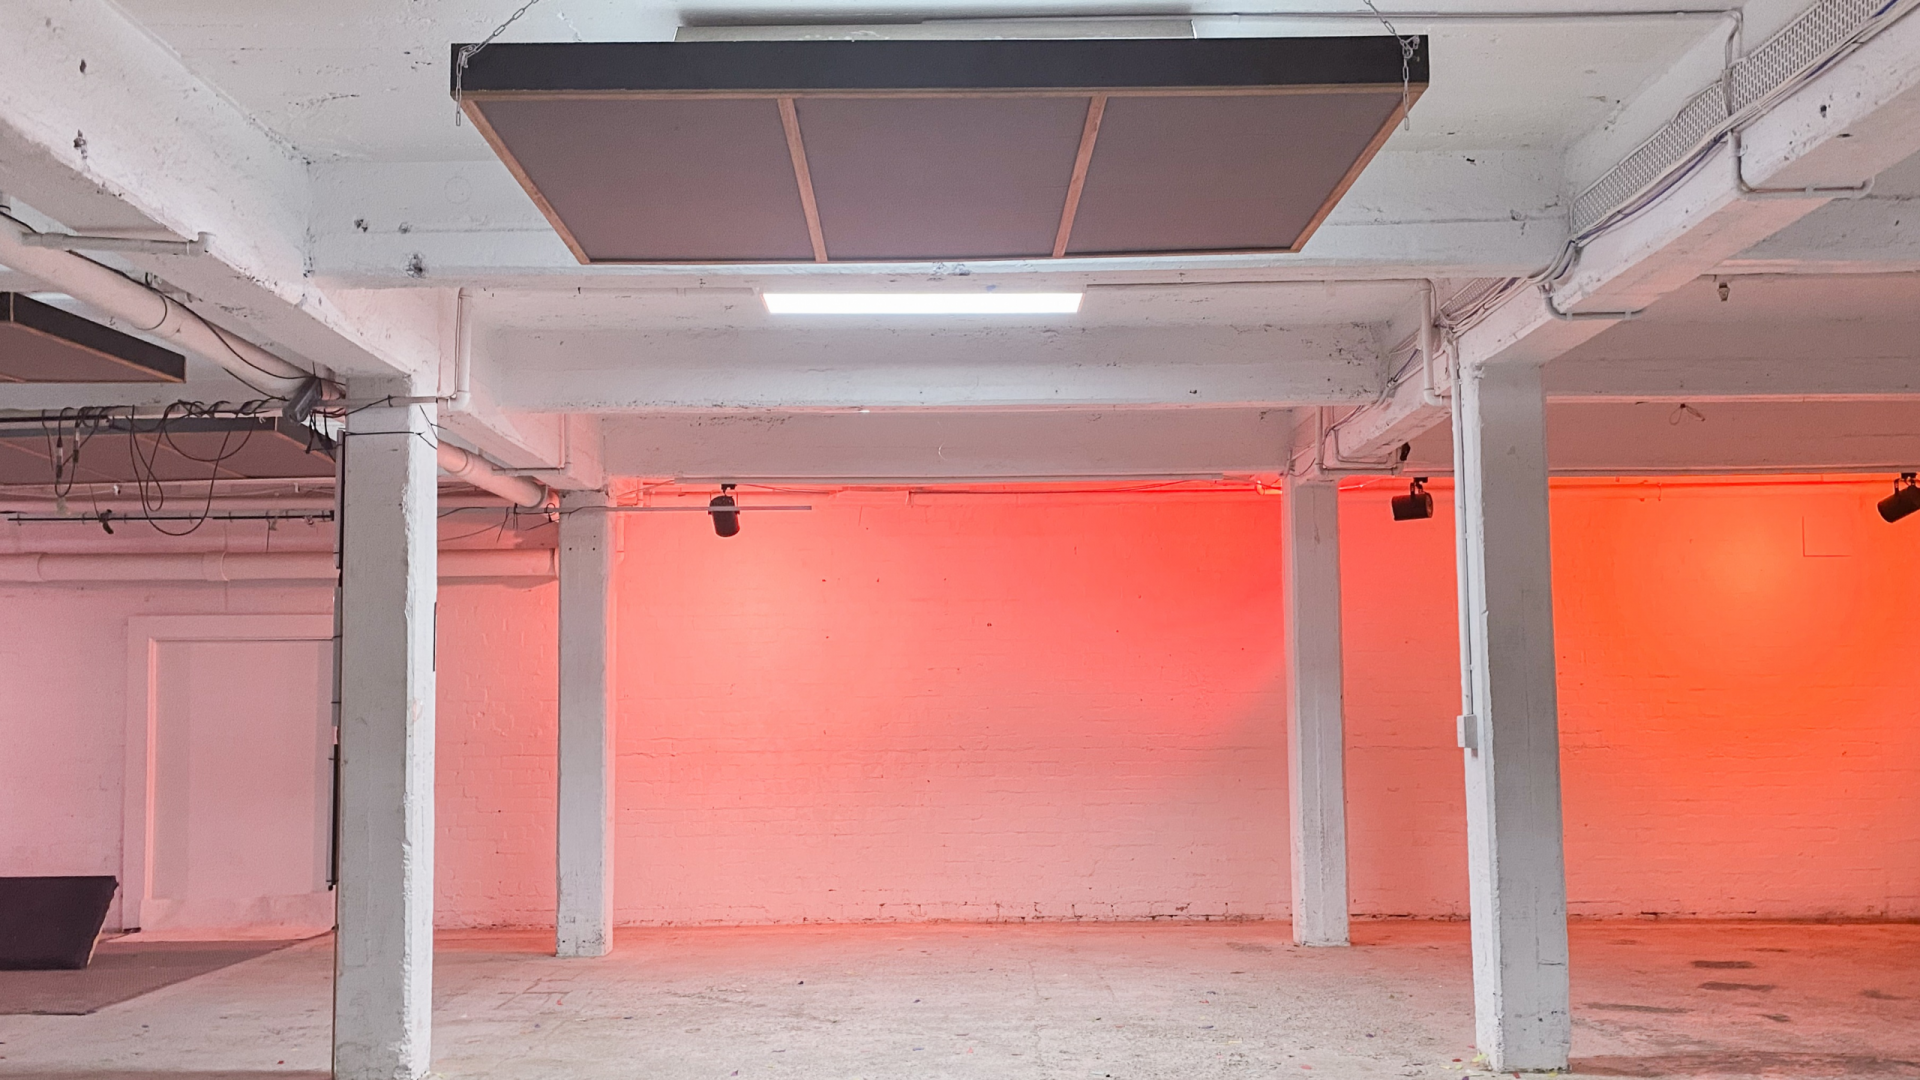 ByProduct exhibition will be held at Mycelium studio. Image is of the large empty event space large industrial area with a read light on the back wall.